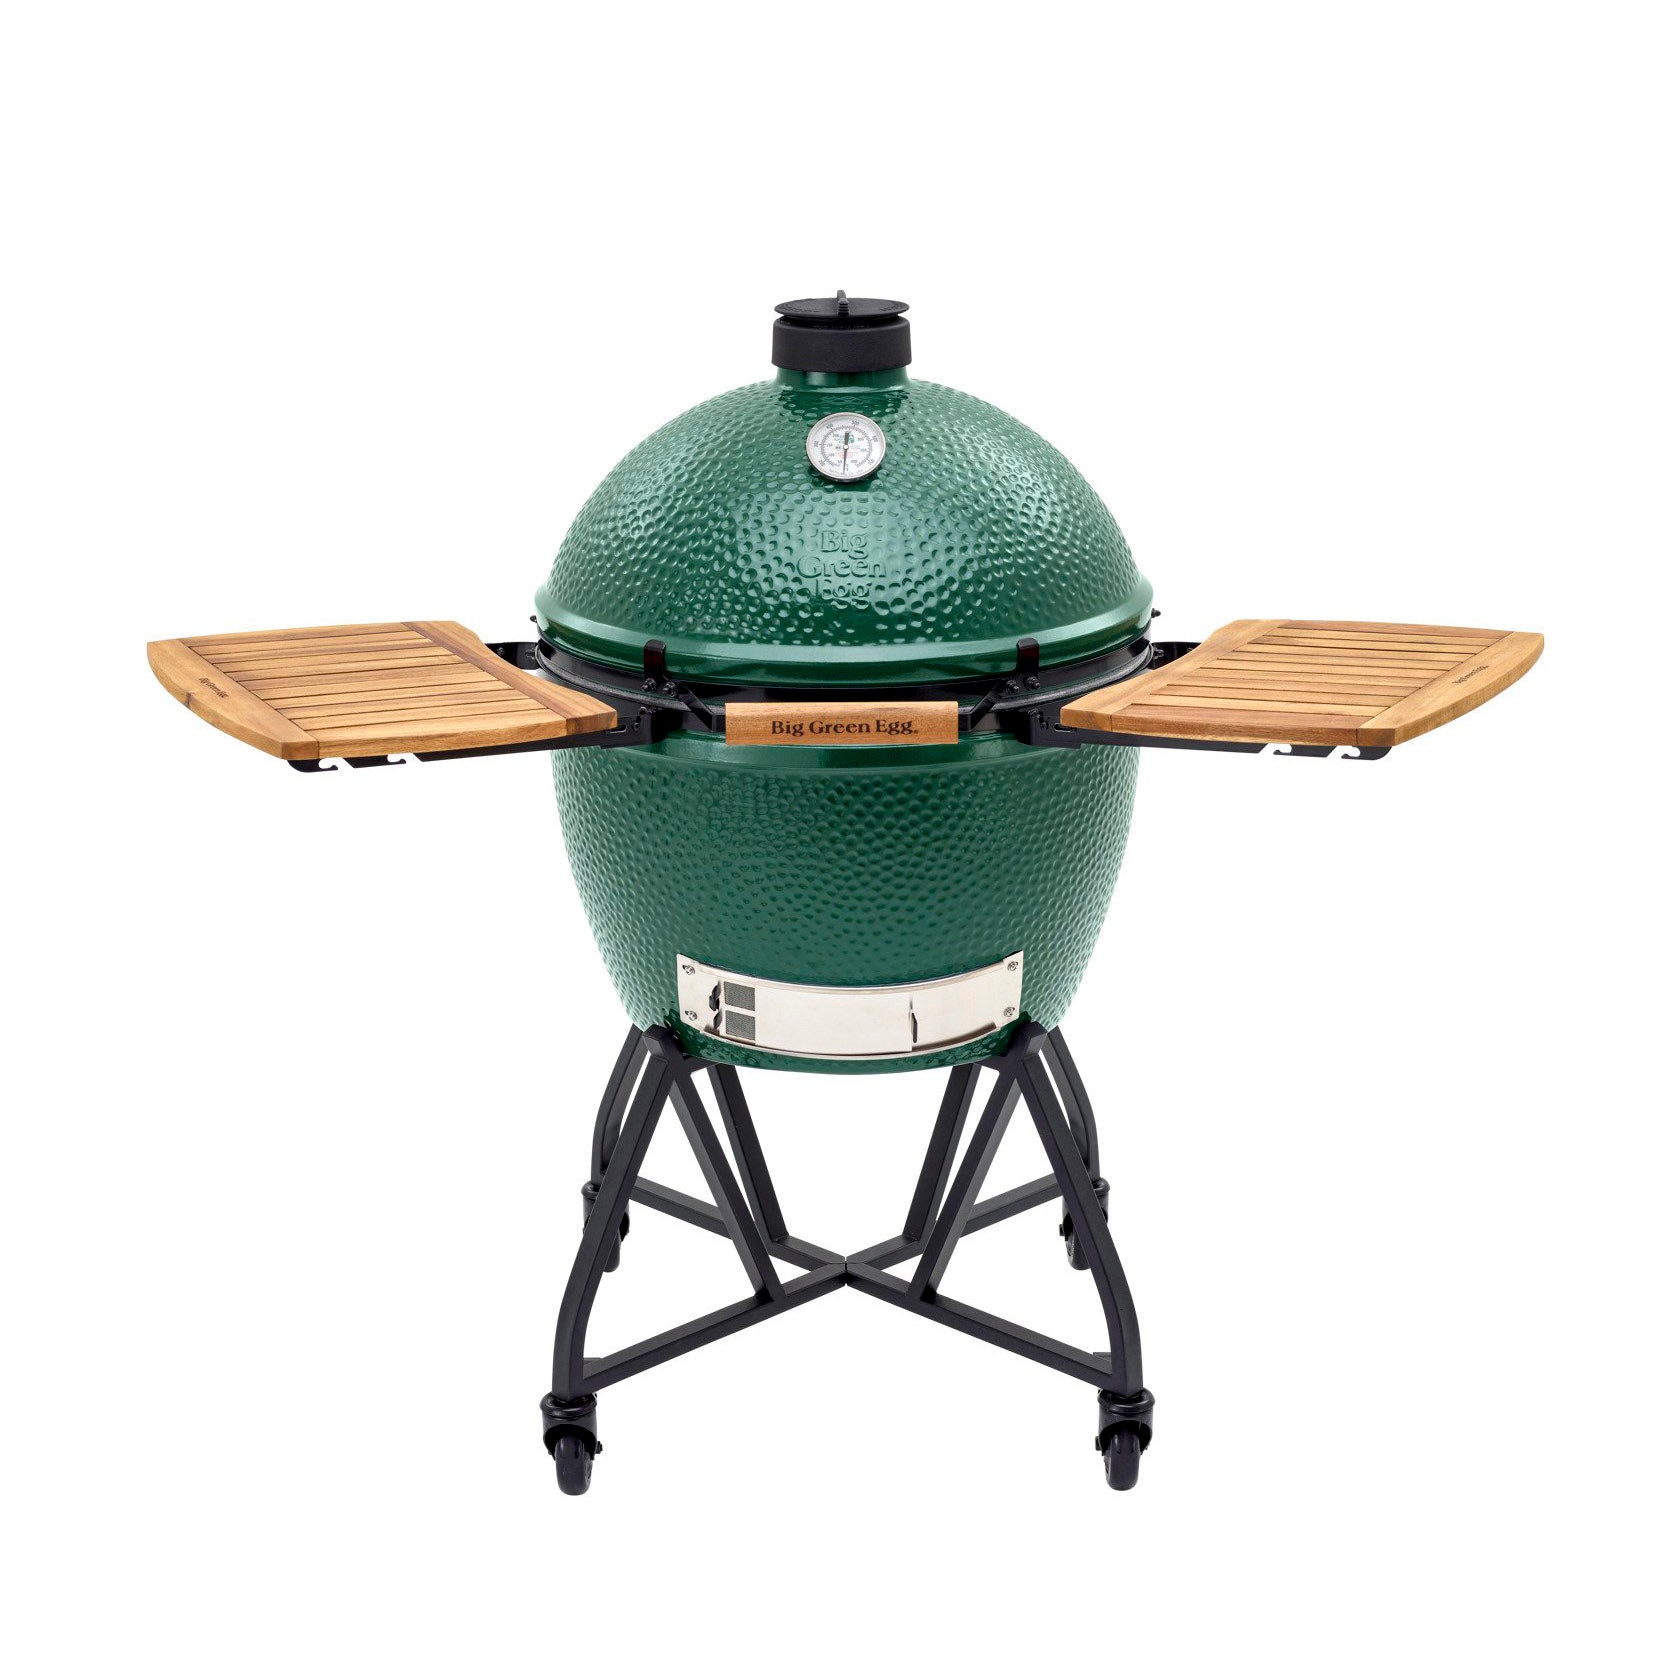 Big Green Egg Charcoal Ceramic Grill with Nest & Shelves